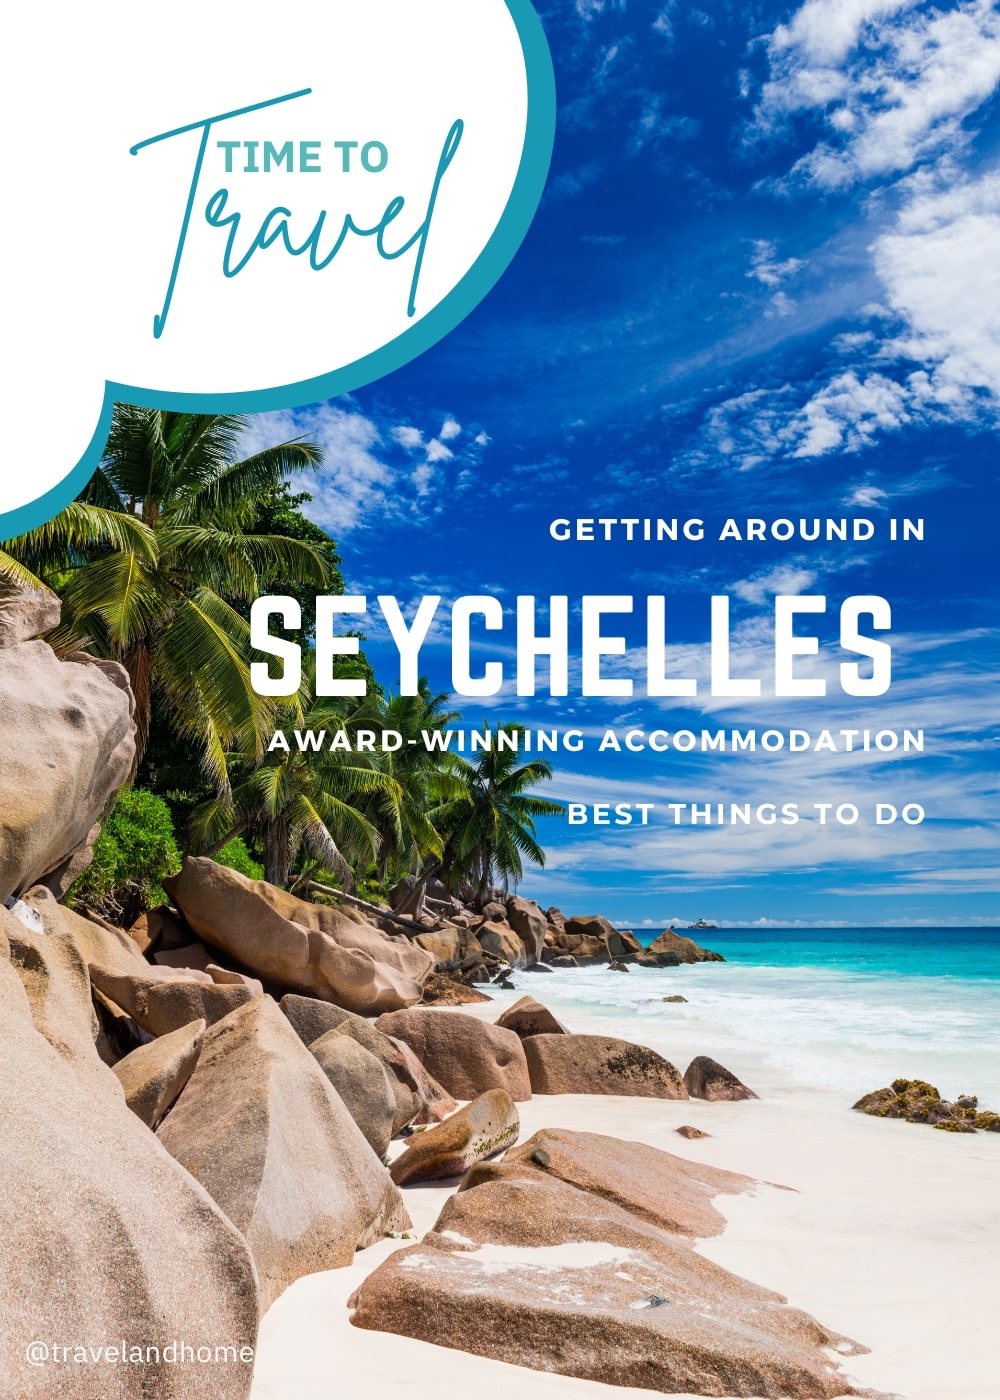 Seychelles perfect honeymoon destination top vacation destinations in the world travelandhome travel and home reis en huis min